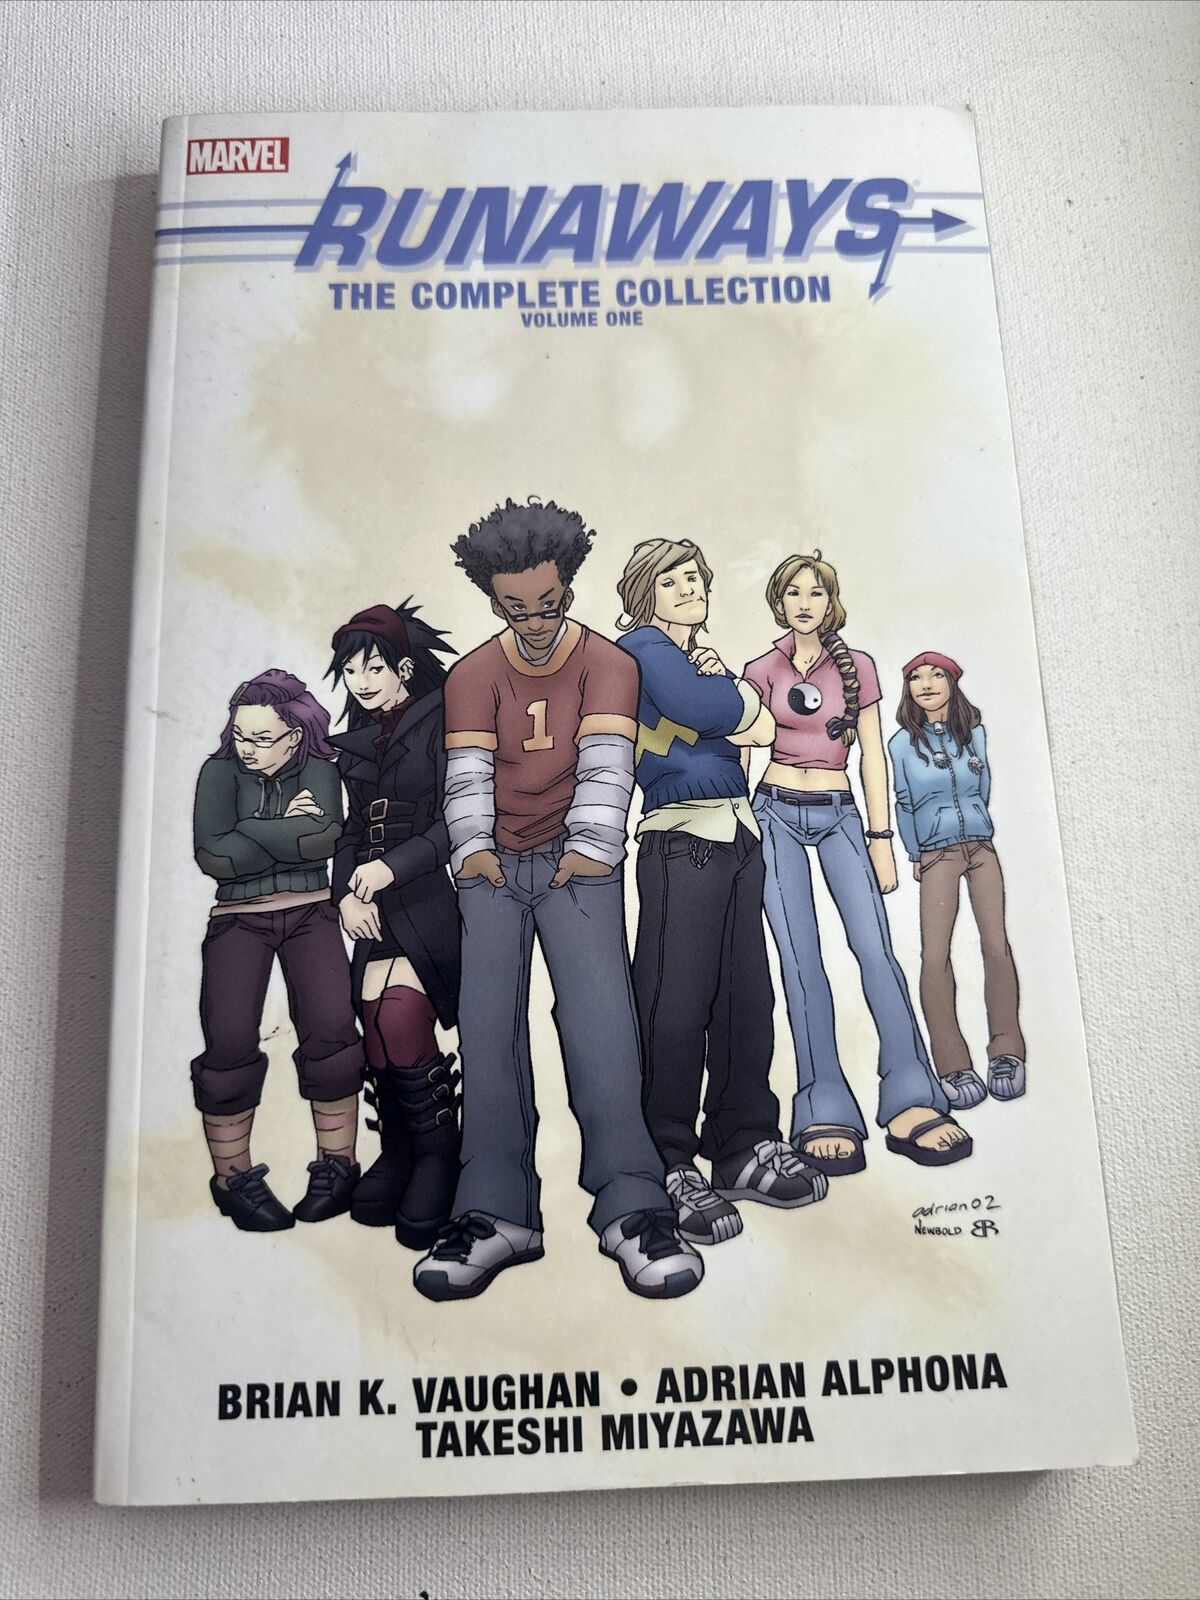 Runaways: the Complete Collection Volume One #1 (Marvel Comics 2014) Paperback